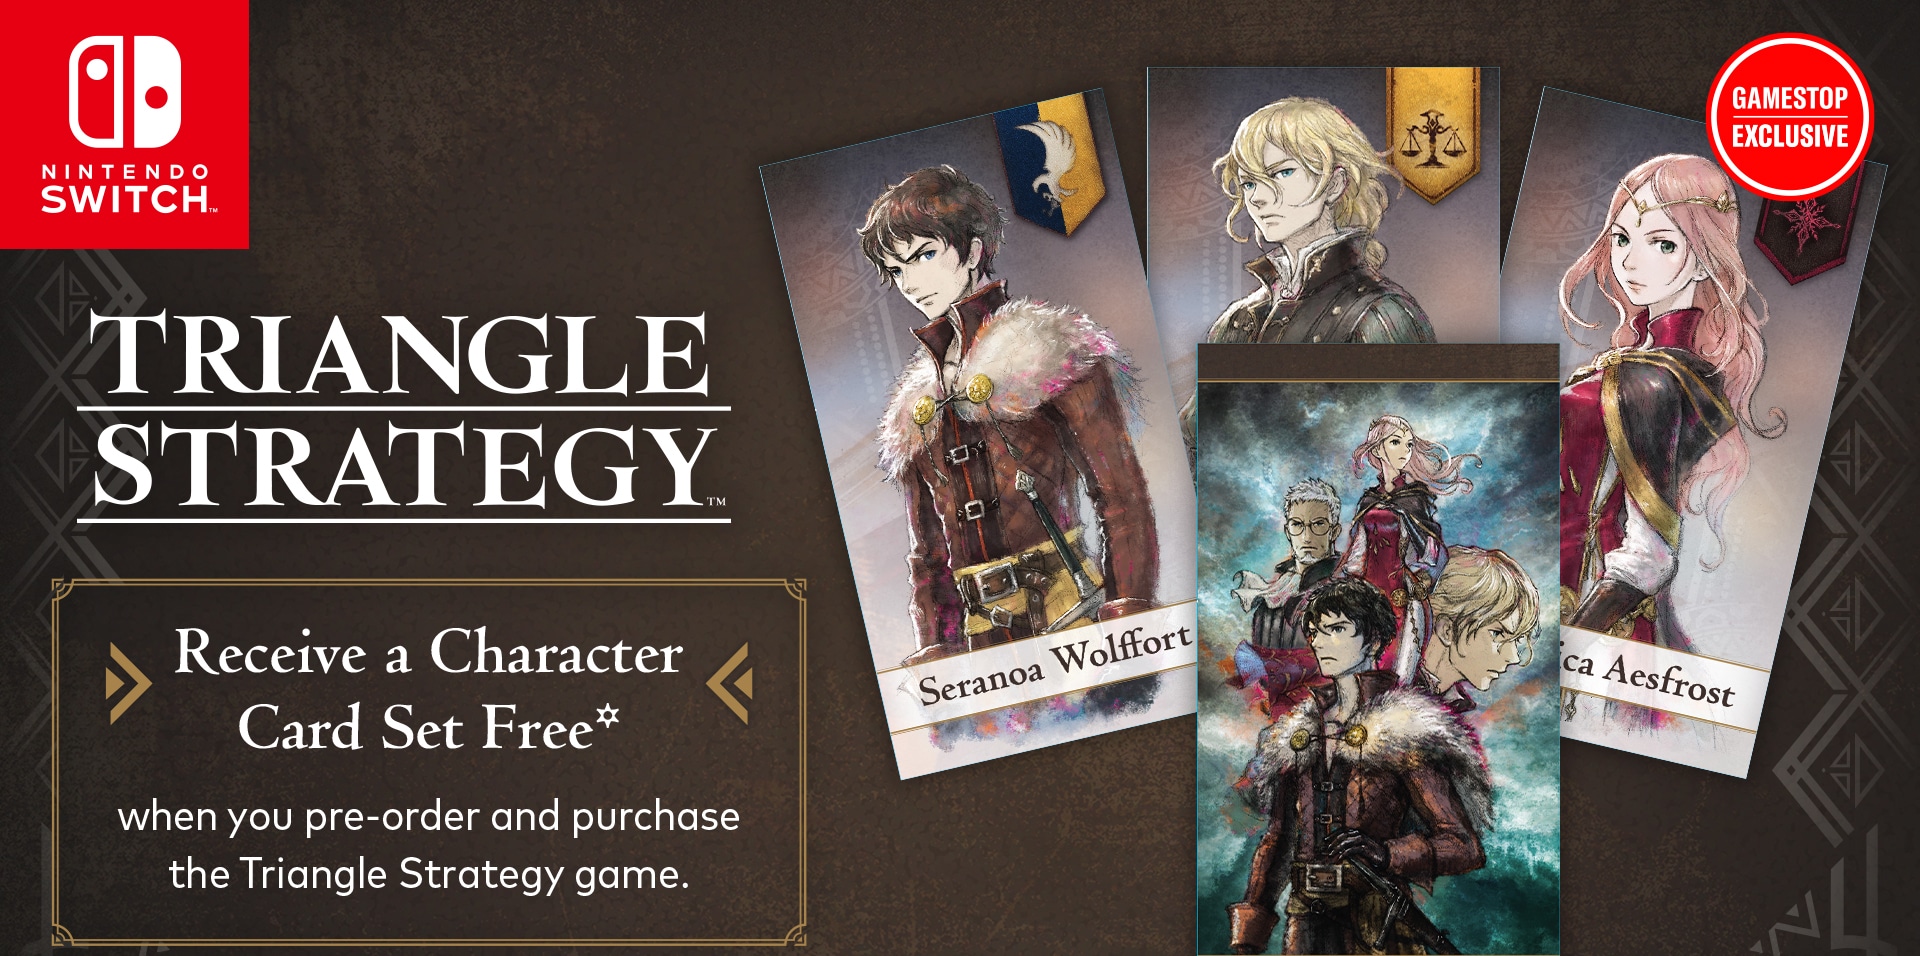 Pre-Ordering Triangle Strategy From GameStop Grants Customers 8 Character Art Cards